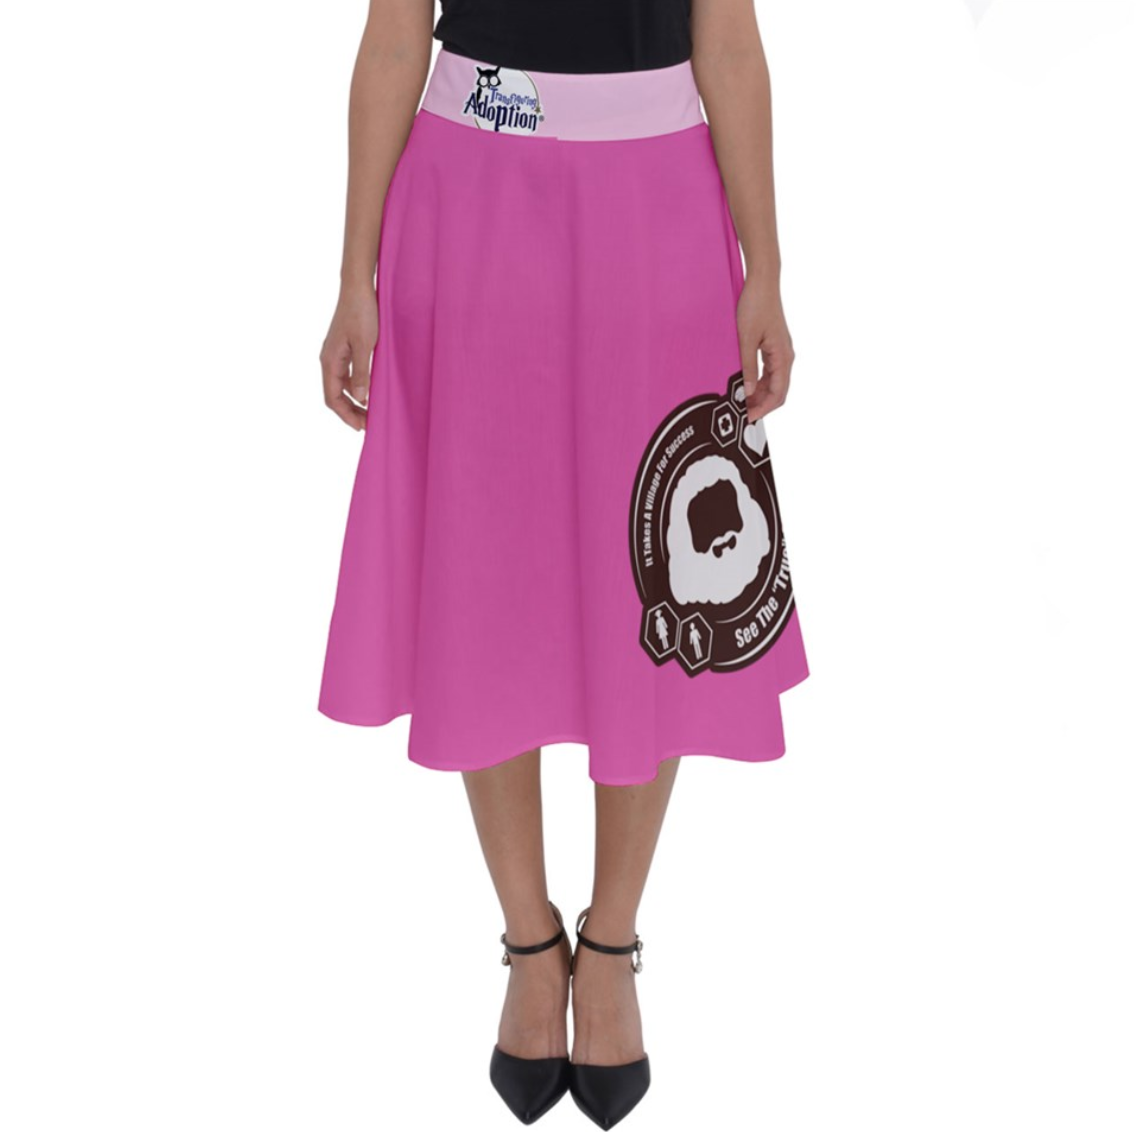 See The "TRUE" Child Perfect Length Midi Skirt (Pink)